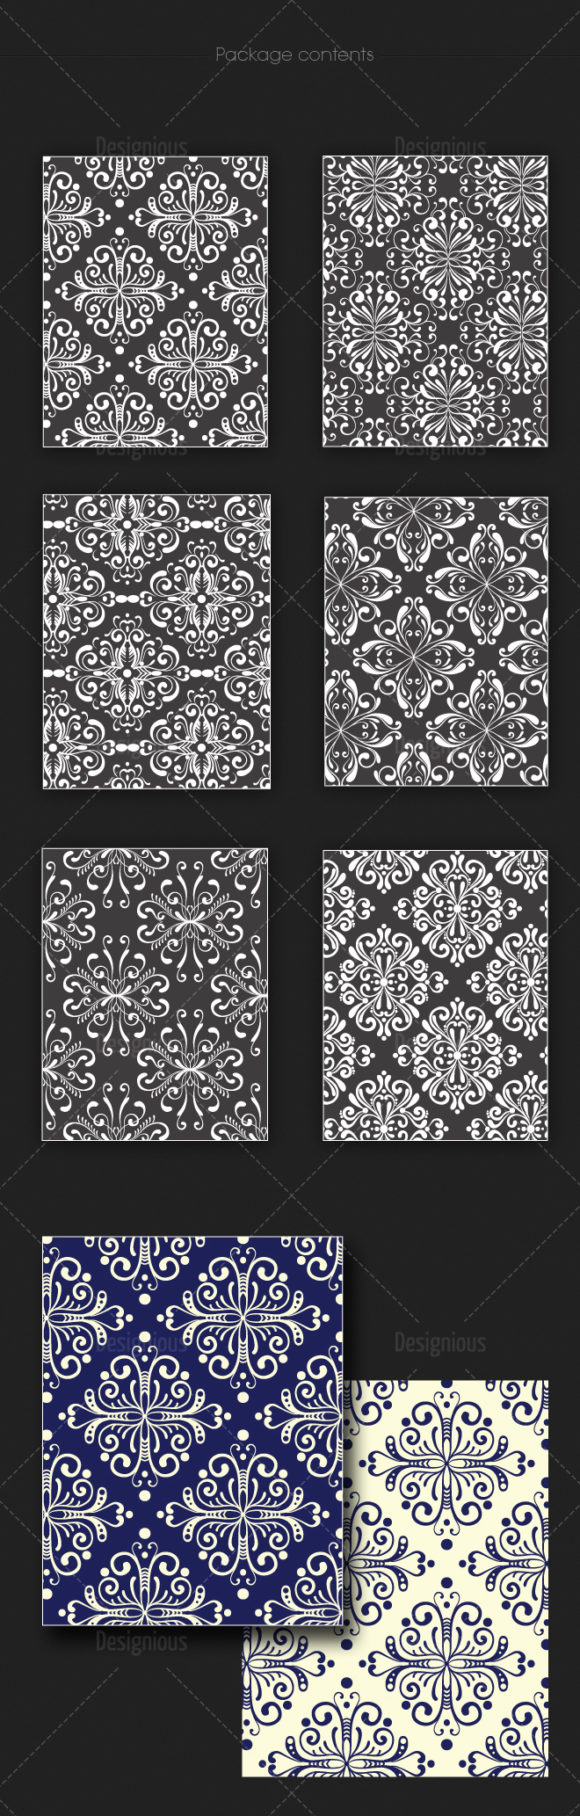 Seamless Patterns Vector Pack 123 2